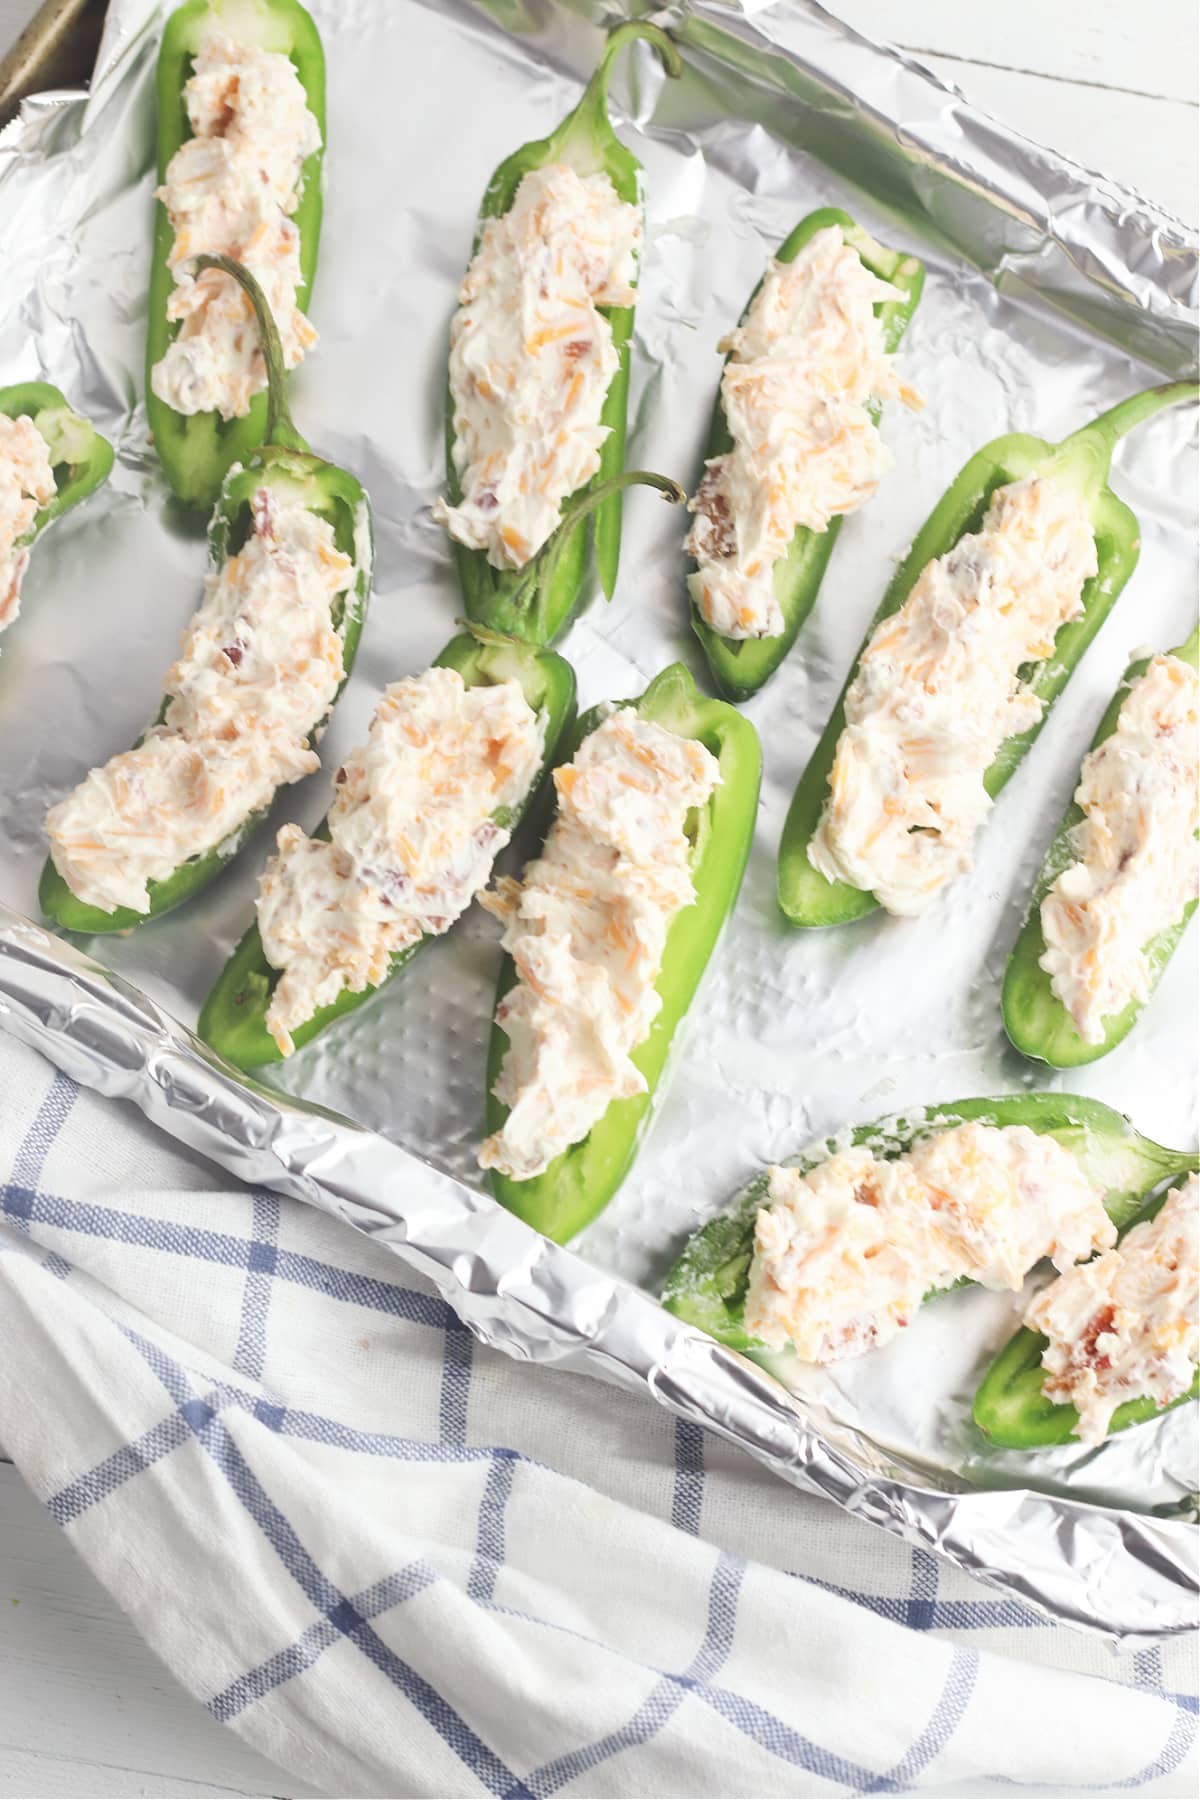 Jalapeno halves filled with cream cheese mixture